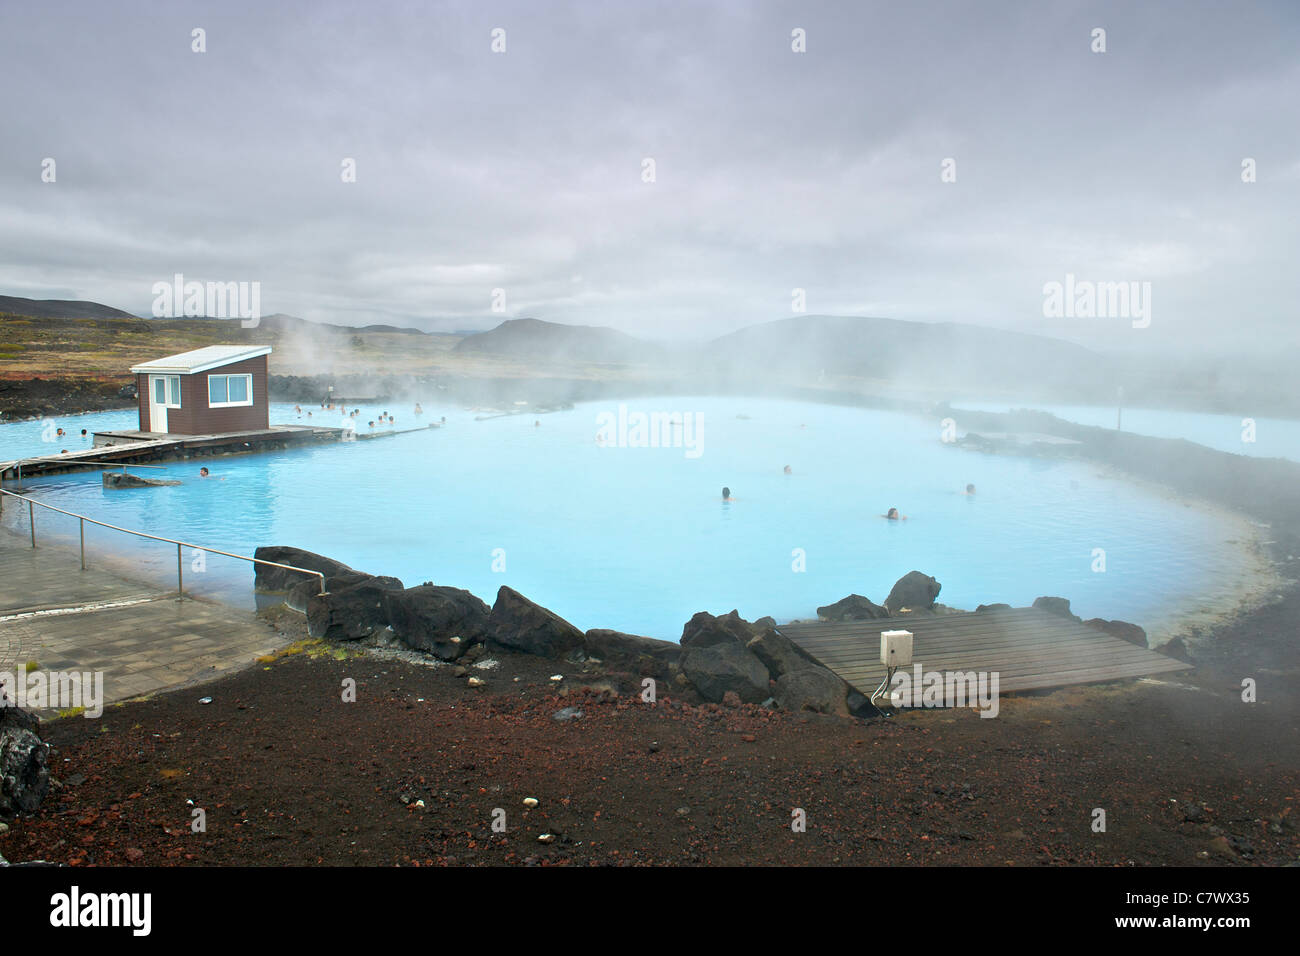 Myvatn nature lake, a natural, geothermal lake outside Myvatn in northeast Iceland. Stock Photo